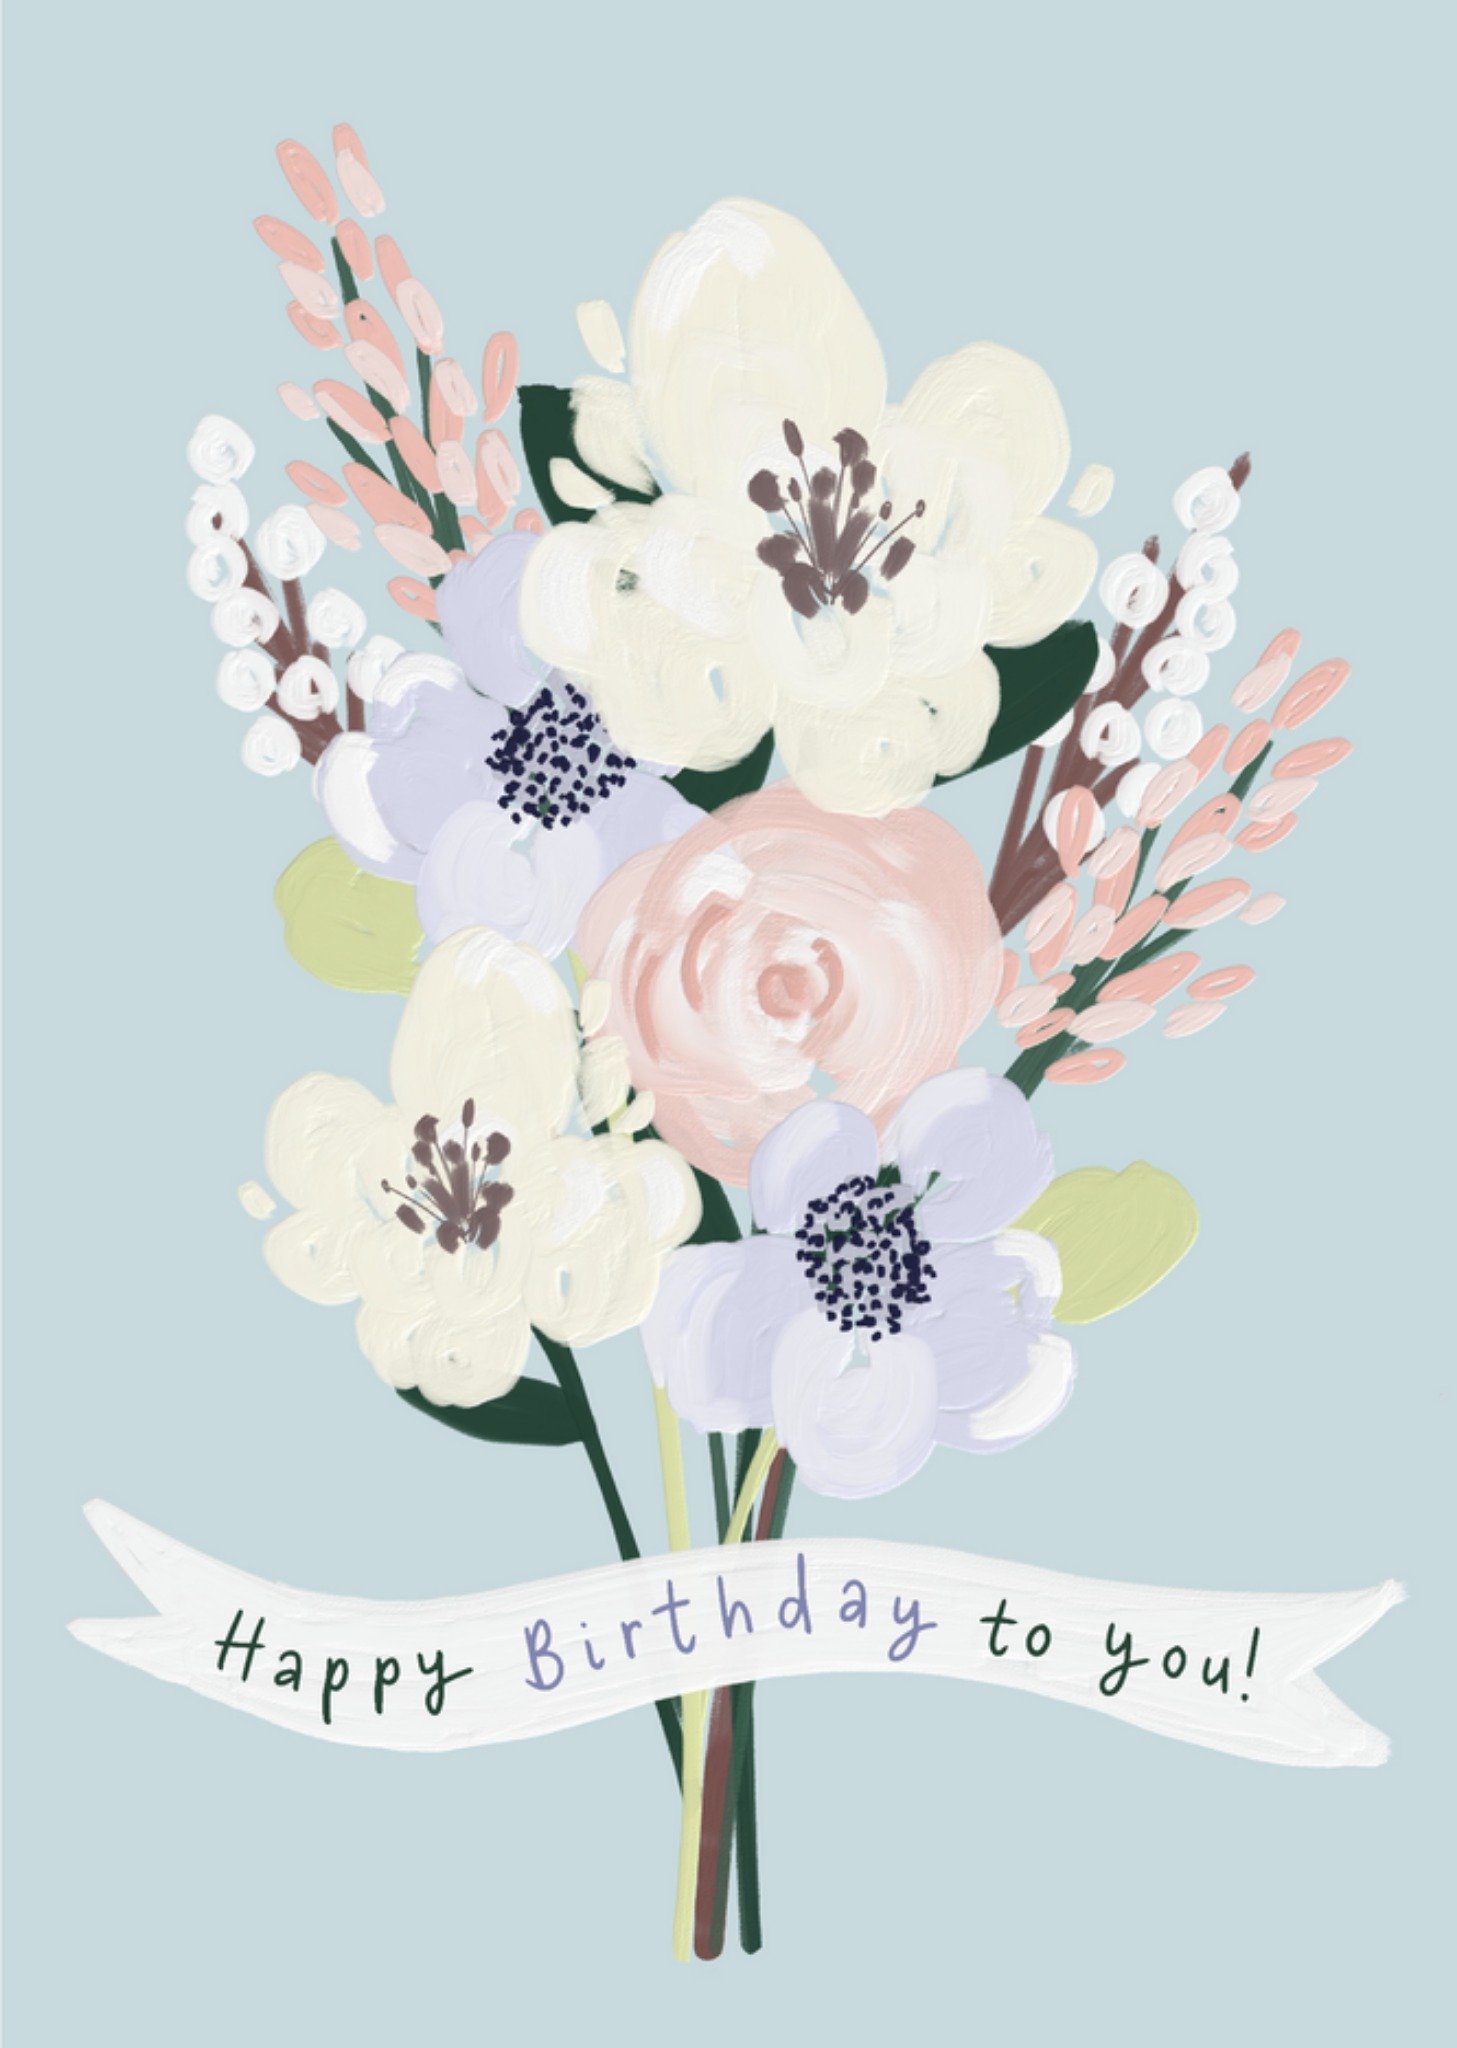 Moonpig Sweet Happy Birthday To You Hand Painted Bouquet Of Flowers Birthday Card, Large